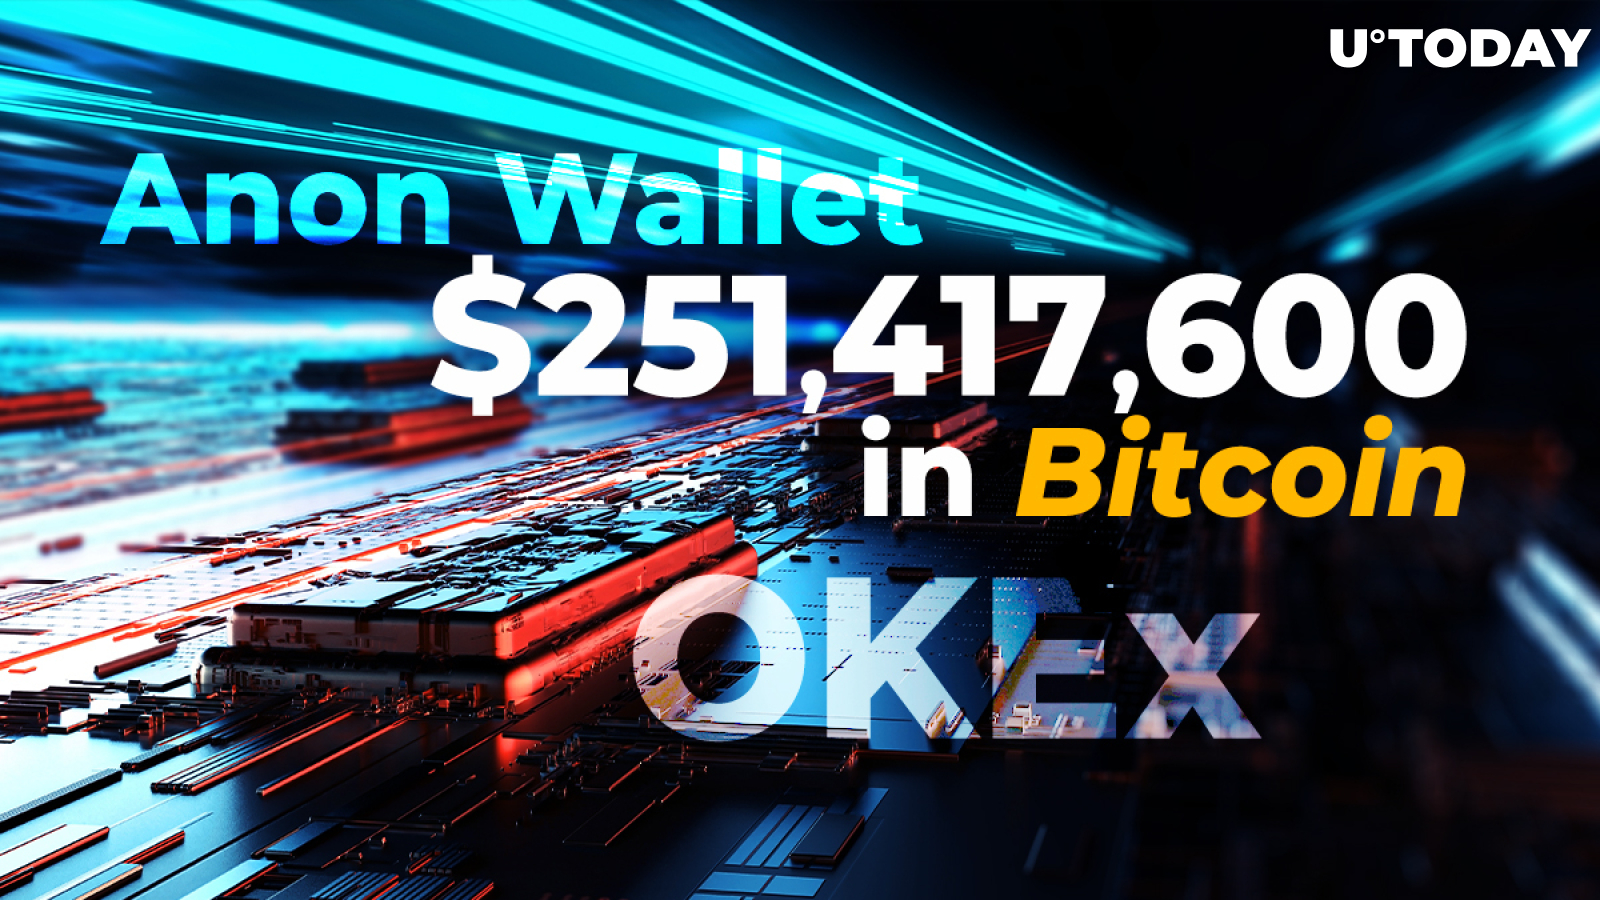 $251,417,600 in Bitcoin Wired Between OKEx and Anon Wallets While BTC Is Testing $11,000